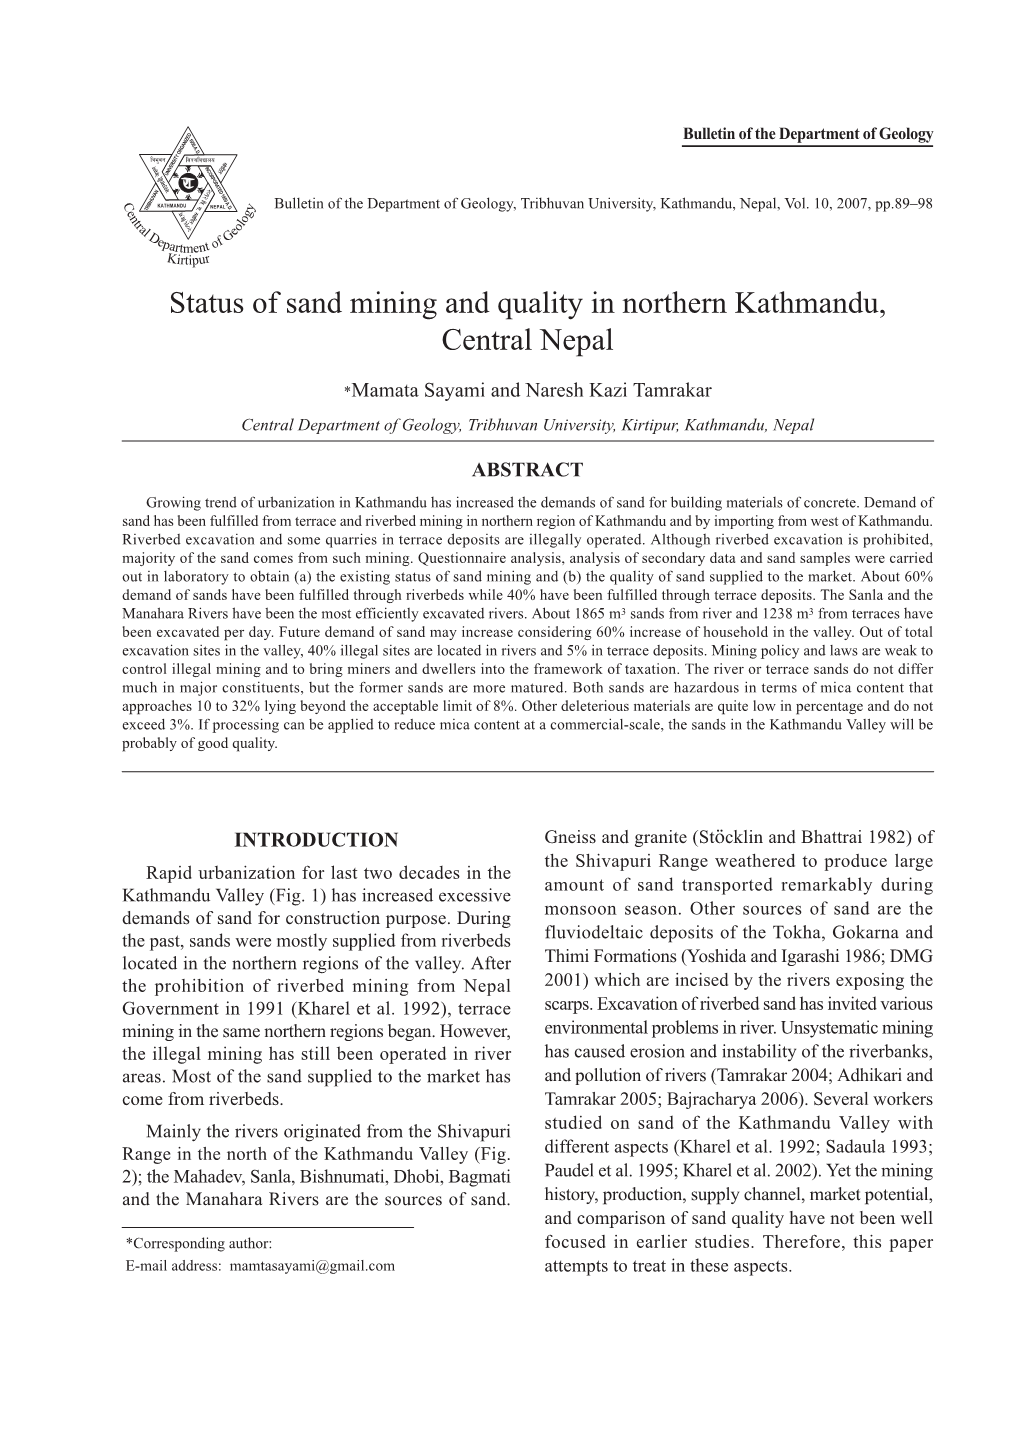 Status of Sand Mining and Quality in Northern Kathmandu, Central Nepal